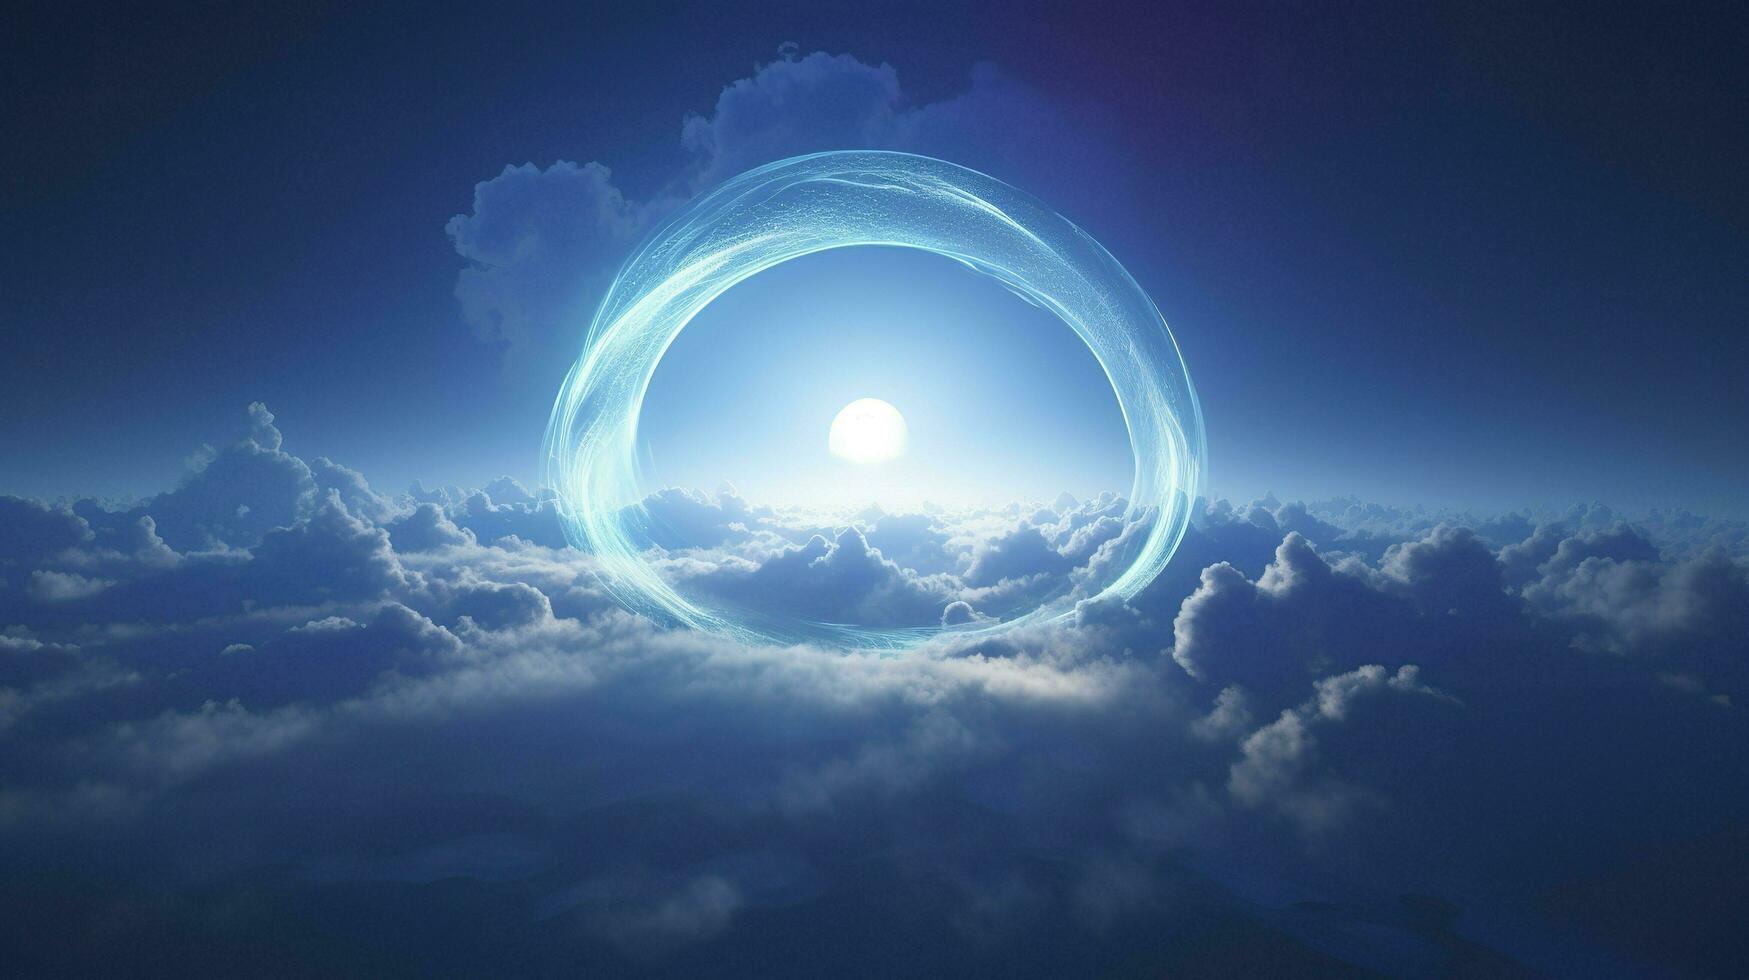 cloud clouds frame blue light, in the style of circular abstraction, 8k resolution, cosmic symbolism, dark symbolism, ethereal landscape, generat ai photo